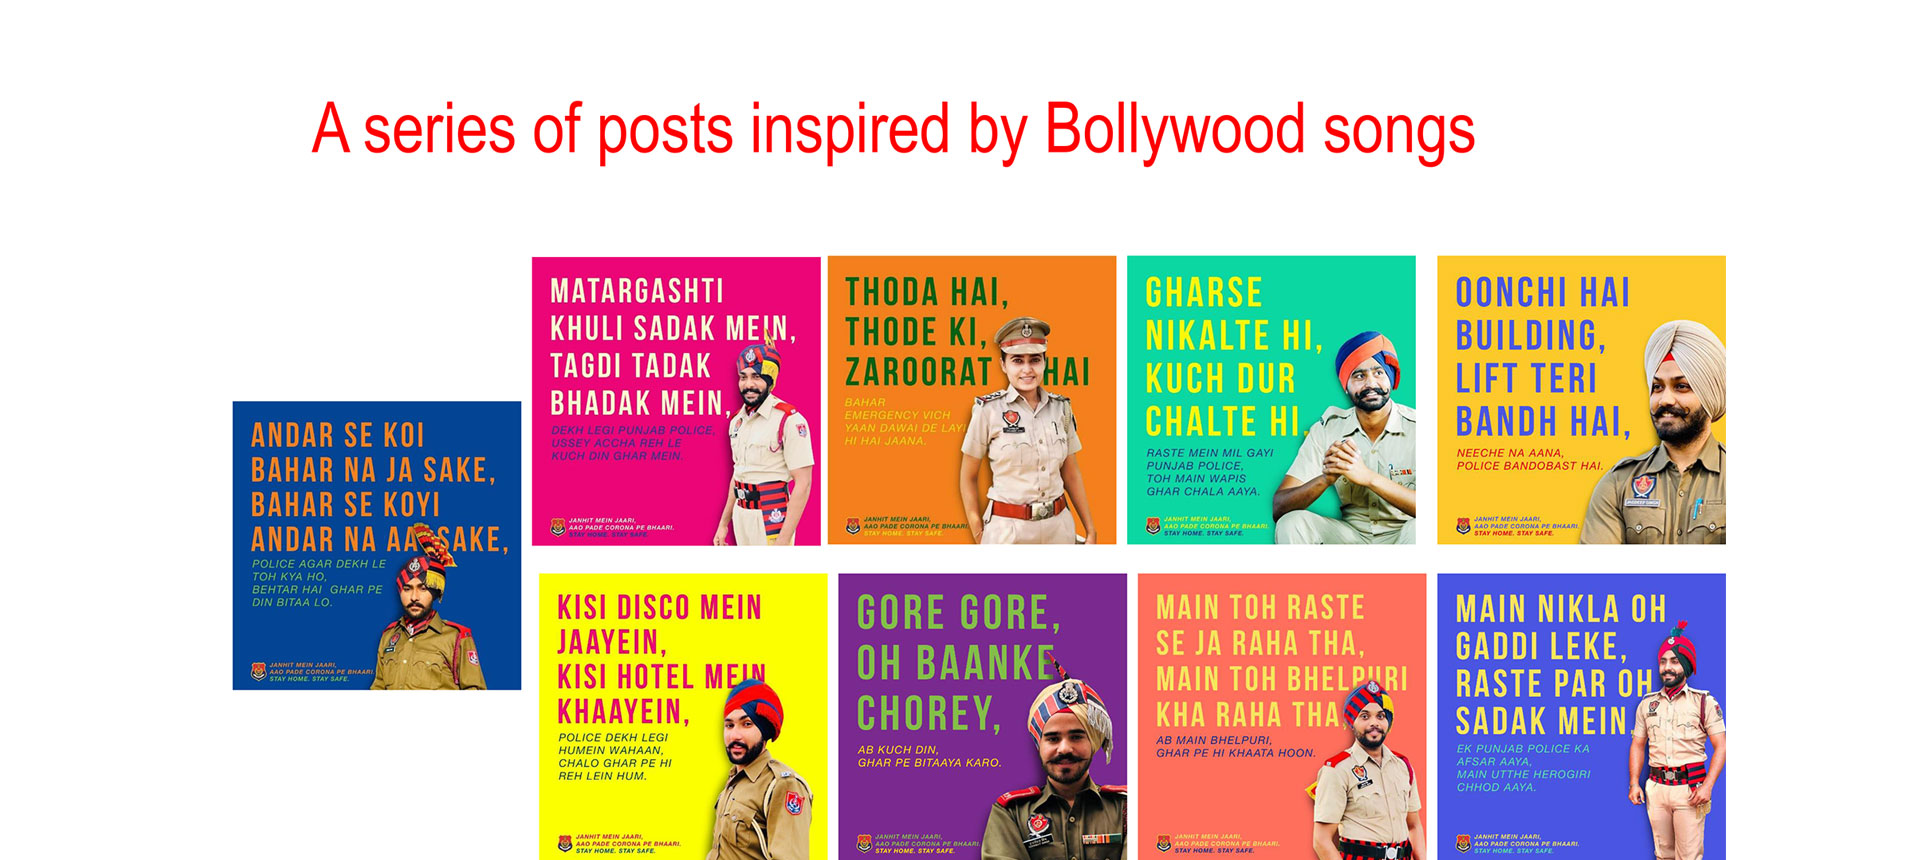 A series of posts inspired by Bollywood songs